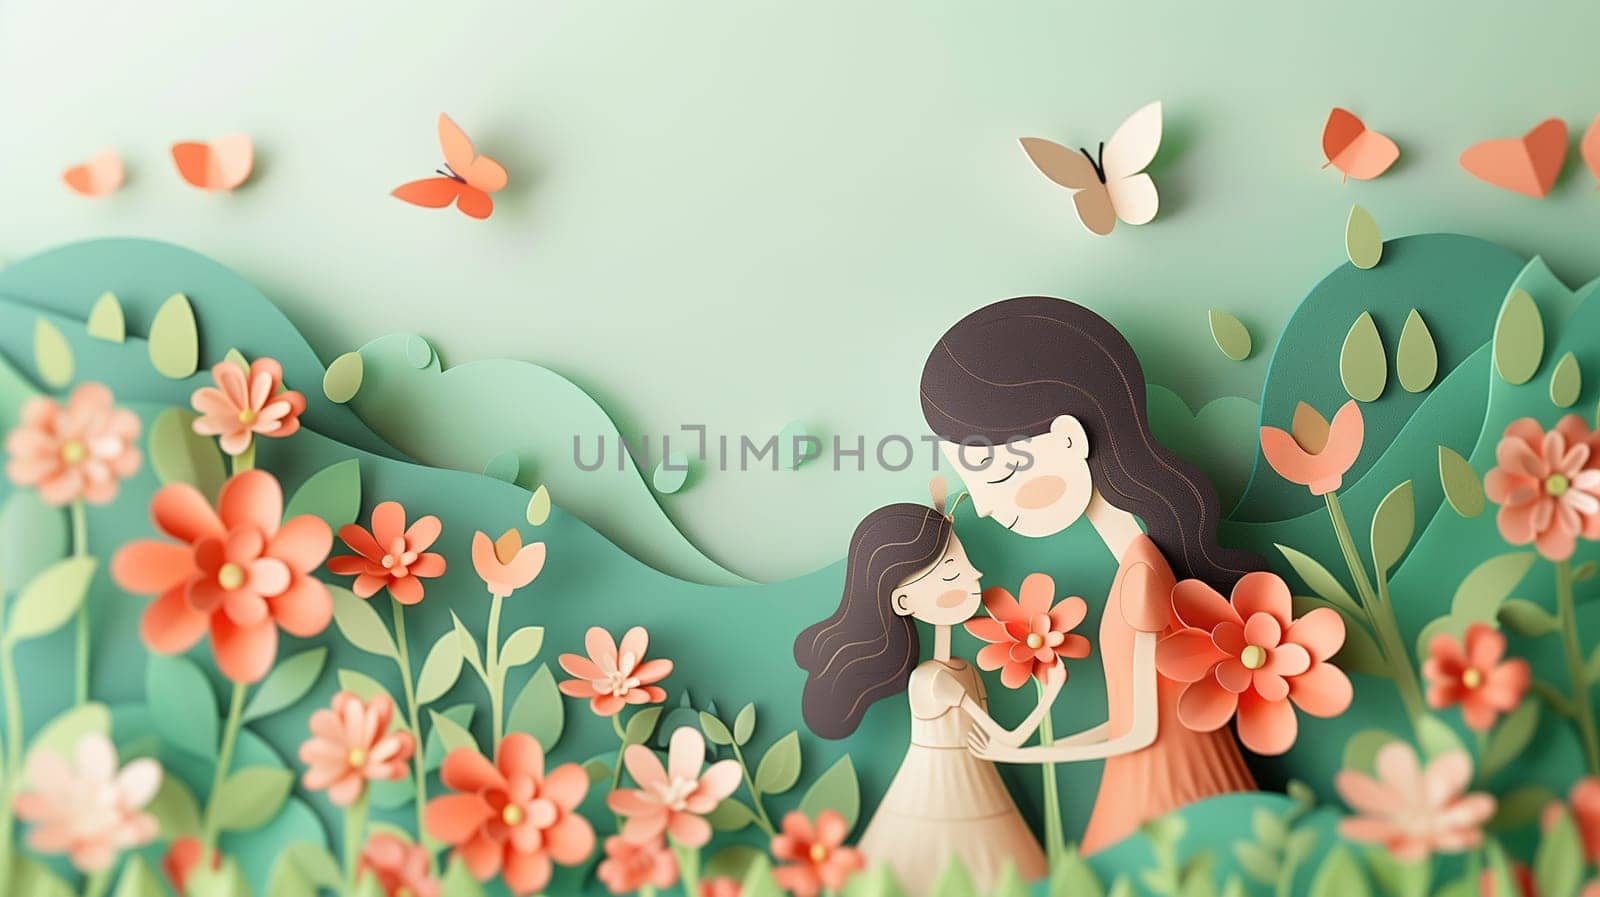 Woman Holding Child in Field of Flowers by TRMK